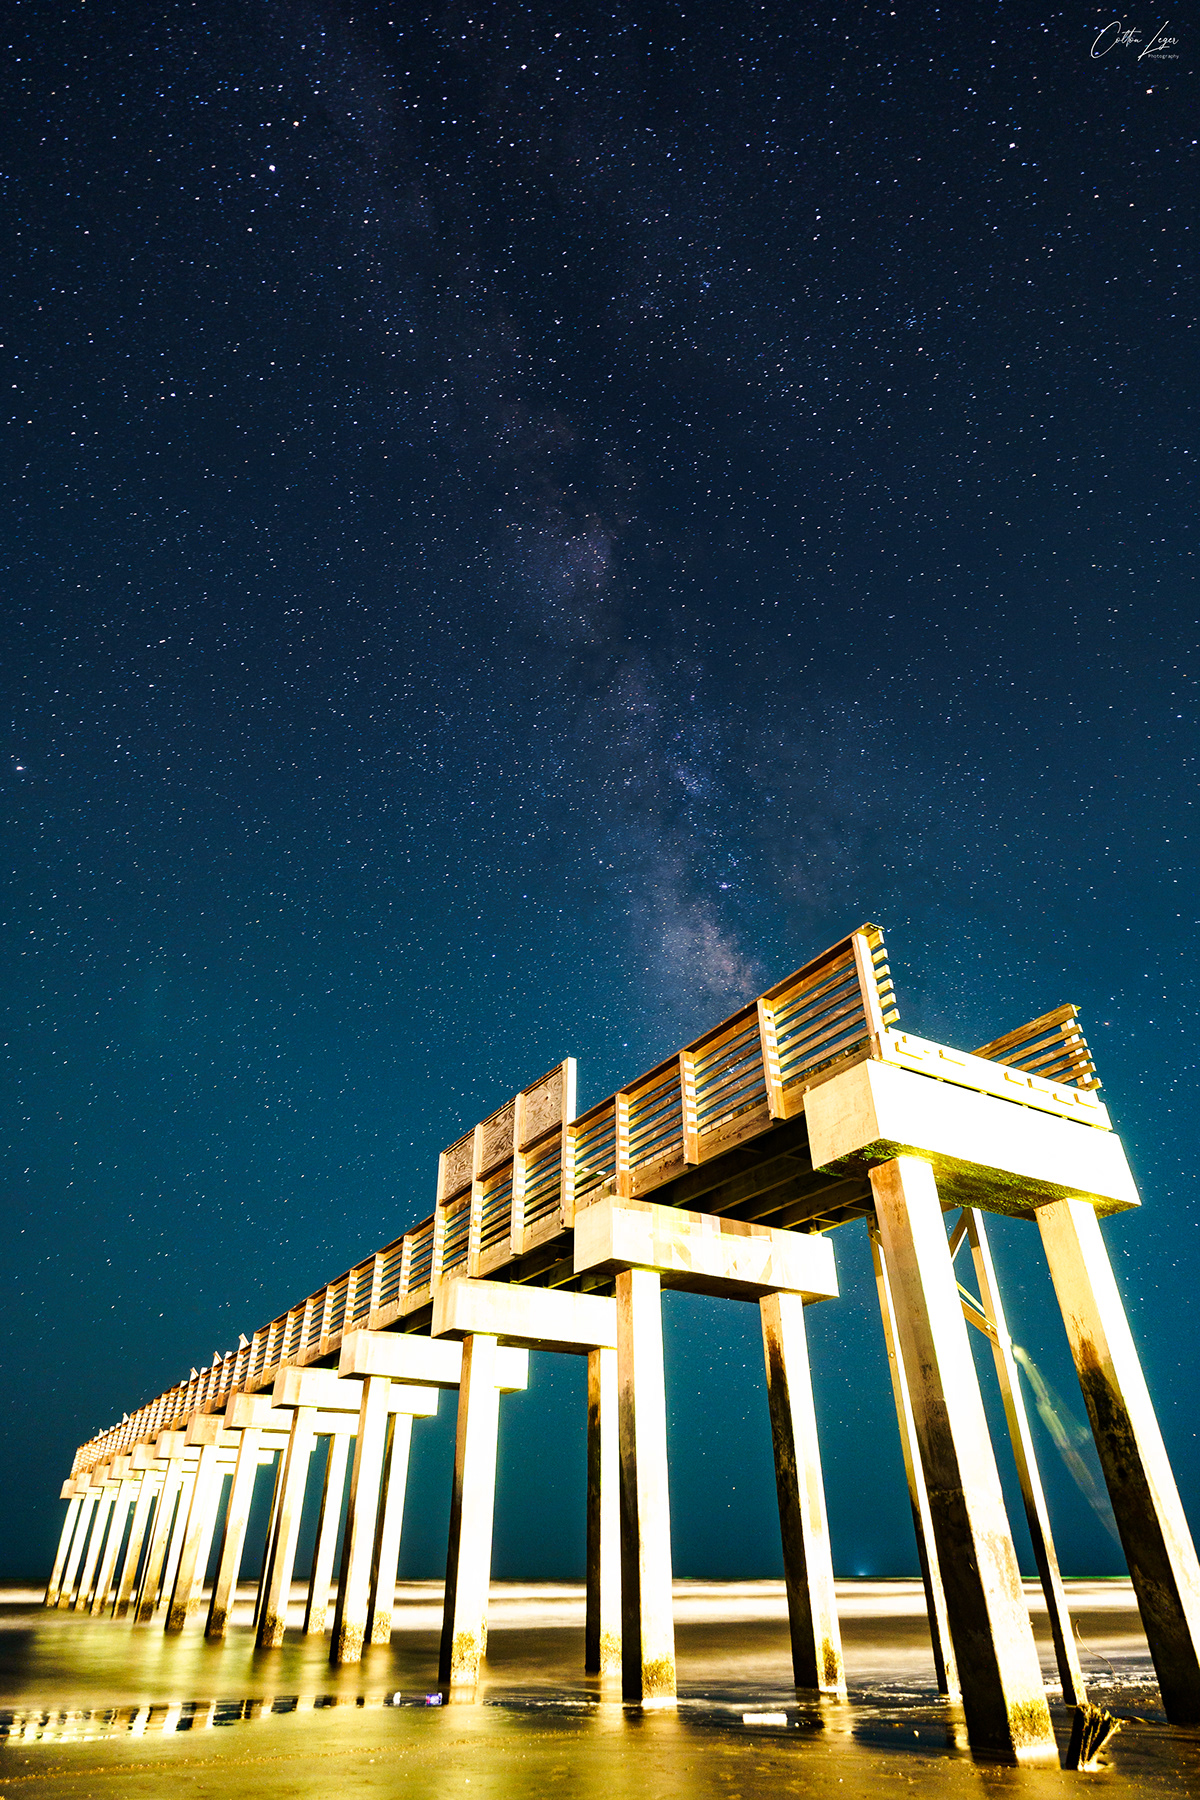 Astrology astronomy astrophotography beach long exposure milky way night photography photographer Photography  stars